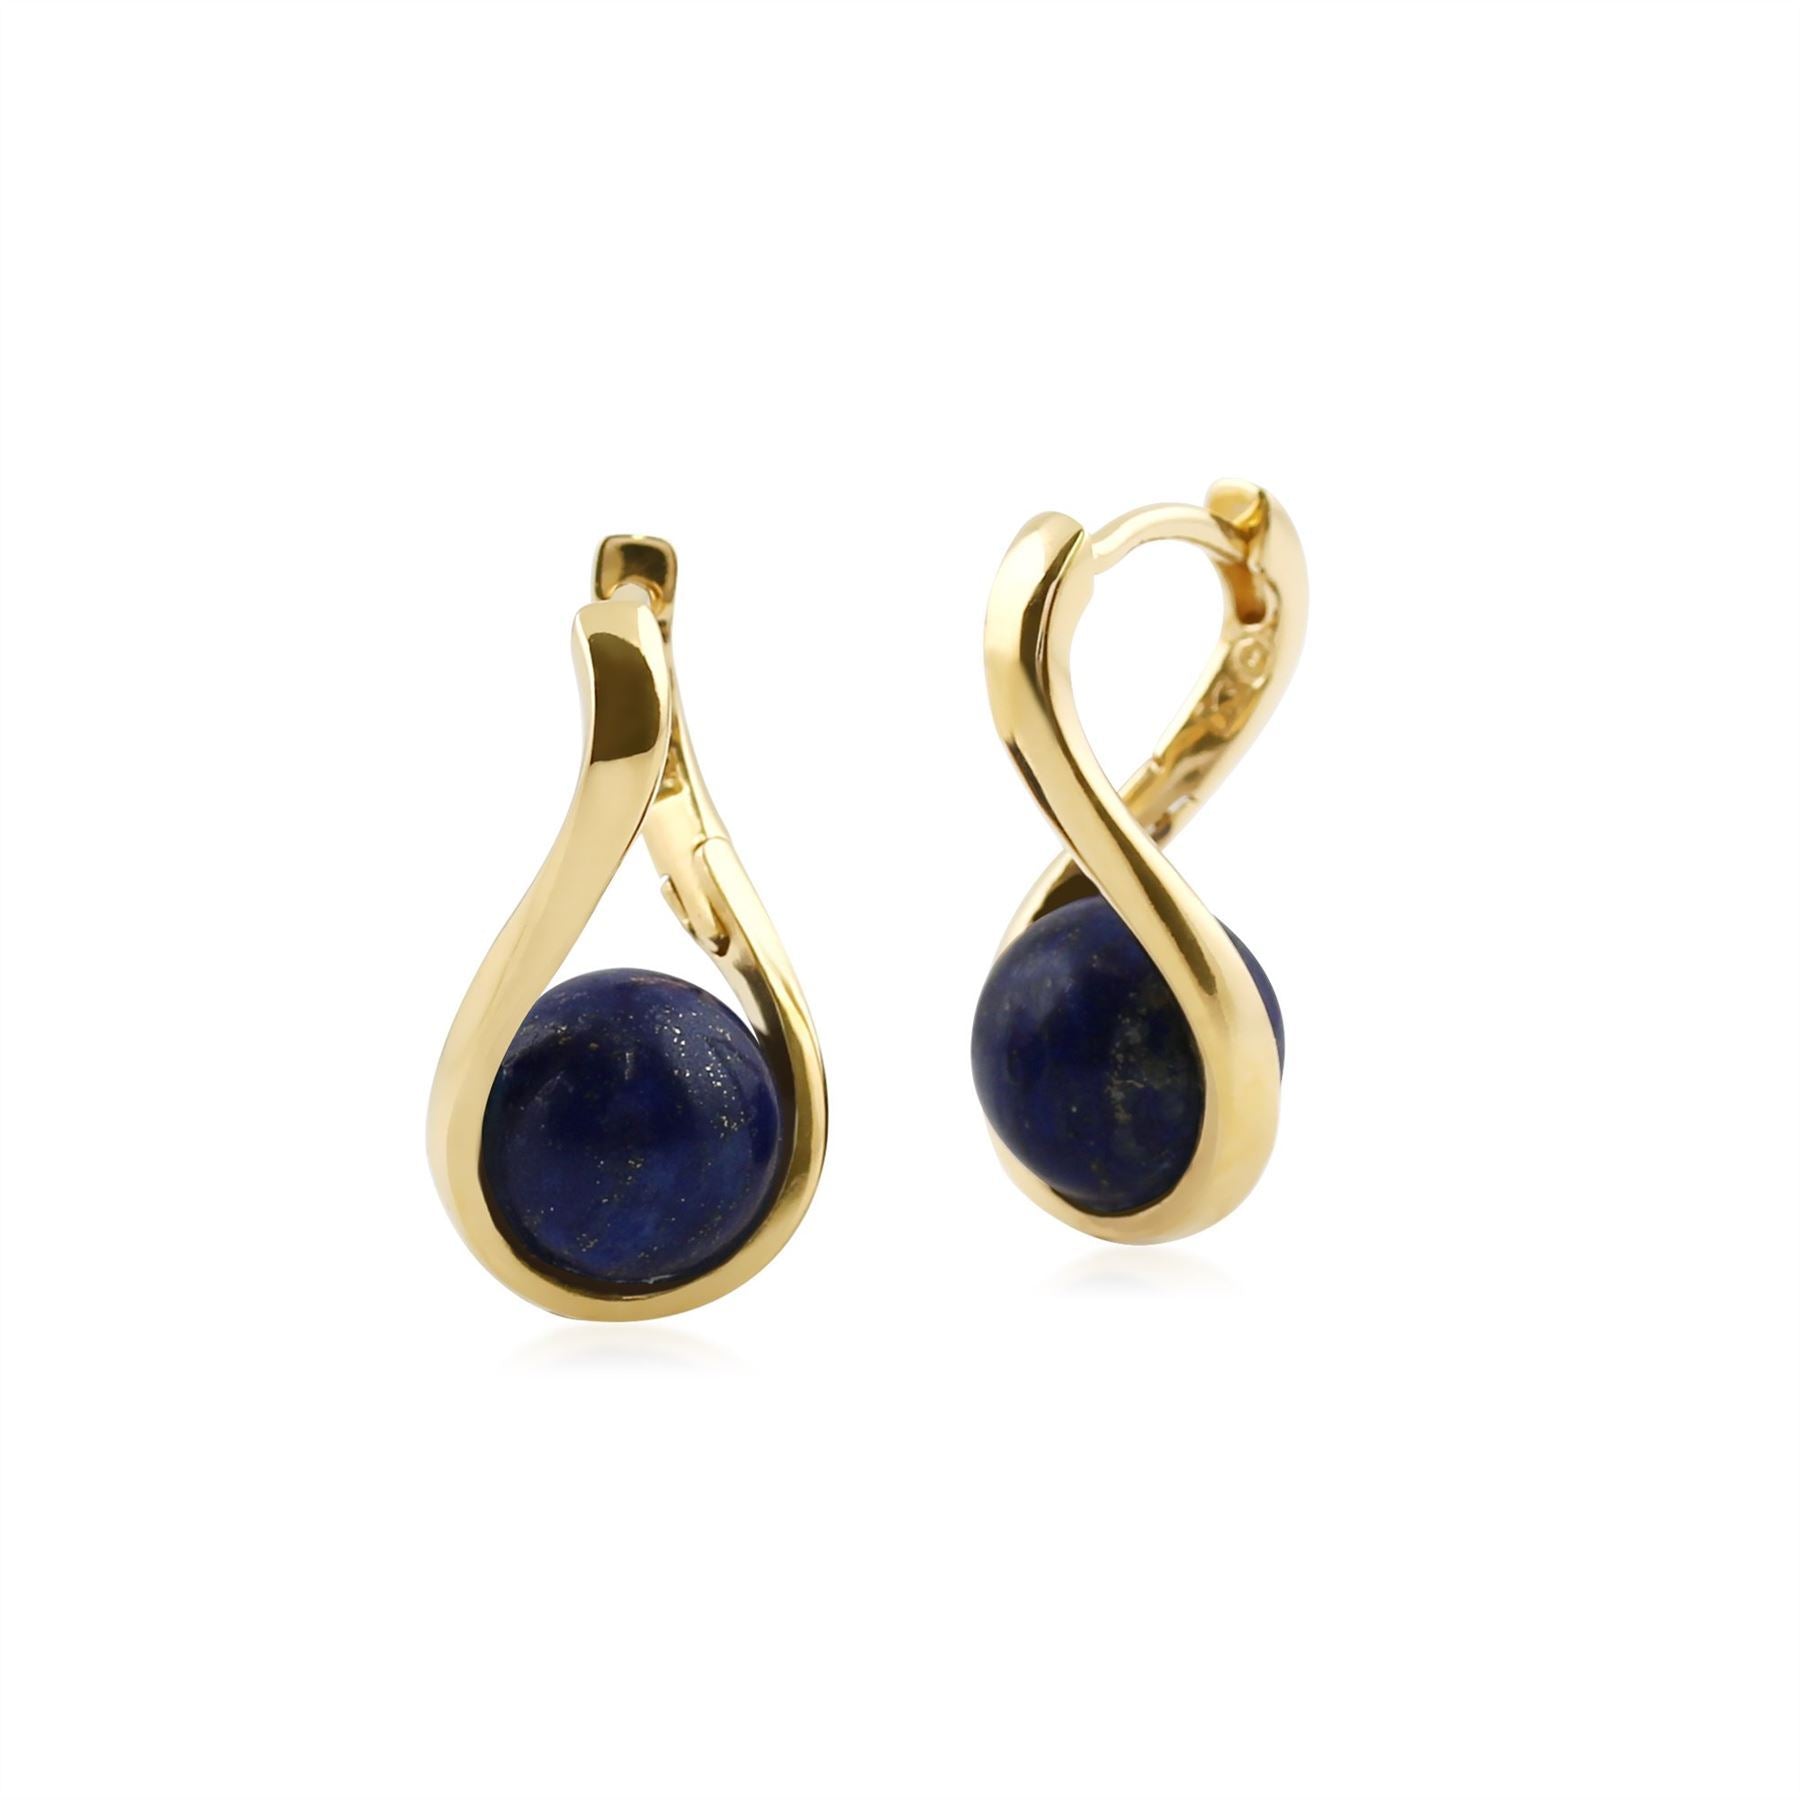 Kosmos Lapis Lazuli Orb Earrings in Yellow Gold Plated Sterling Silver